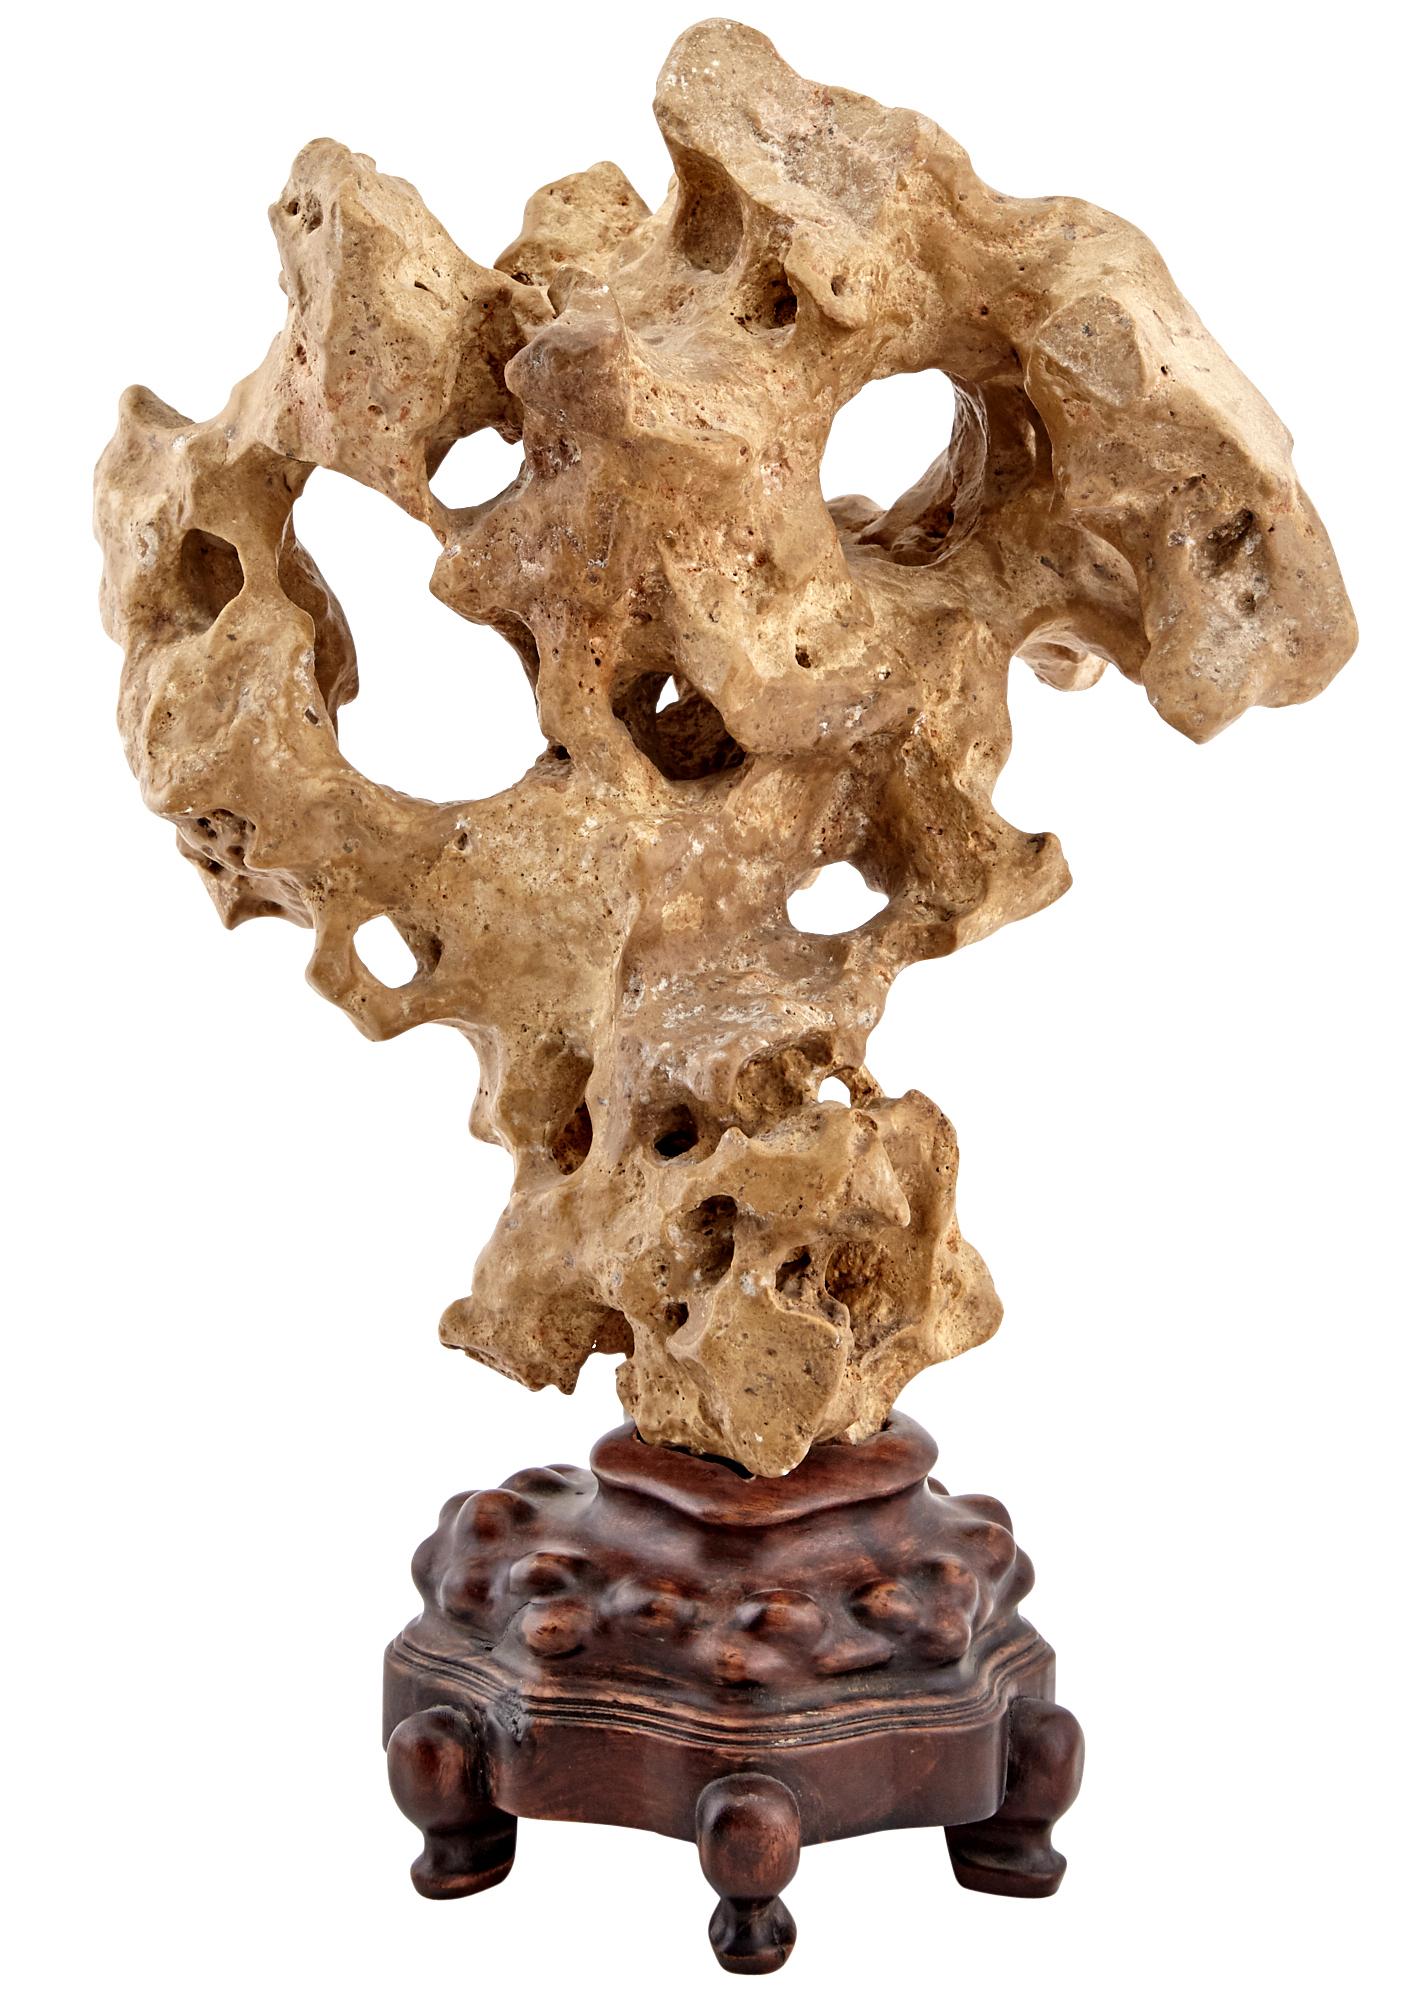 A Taihu scholar rock in a mushroom form balanced on a custom wood stand, purportedly purchased from Kemin Hu, the well known collector, educator and author on this particular subject. The stone display a well weather-smoothed surface in a lovely